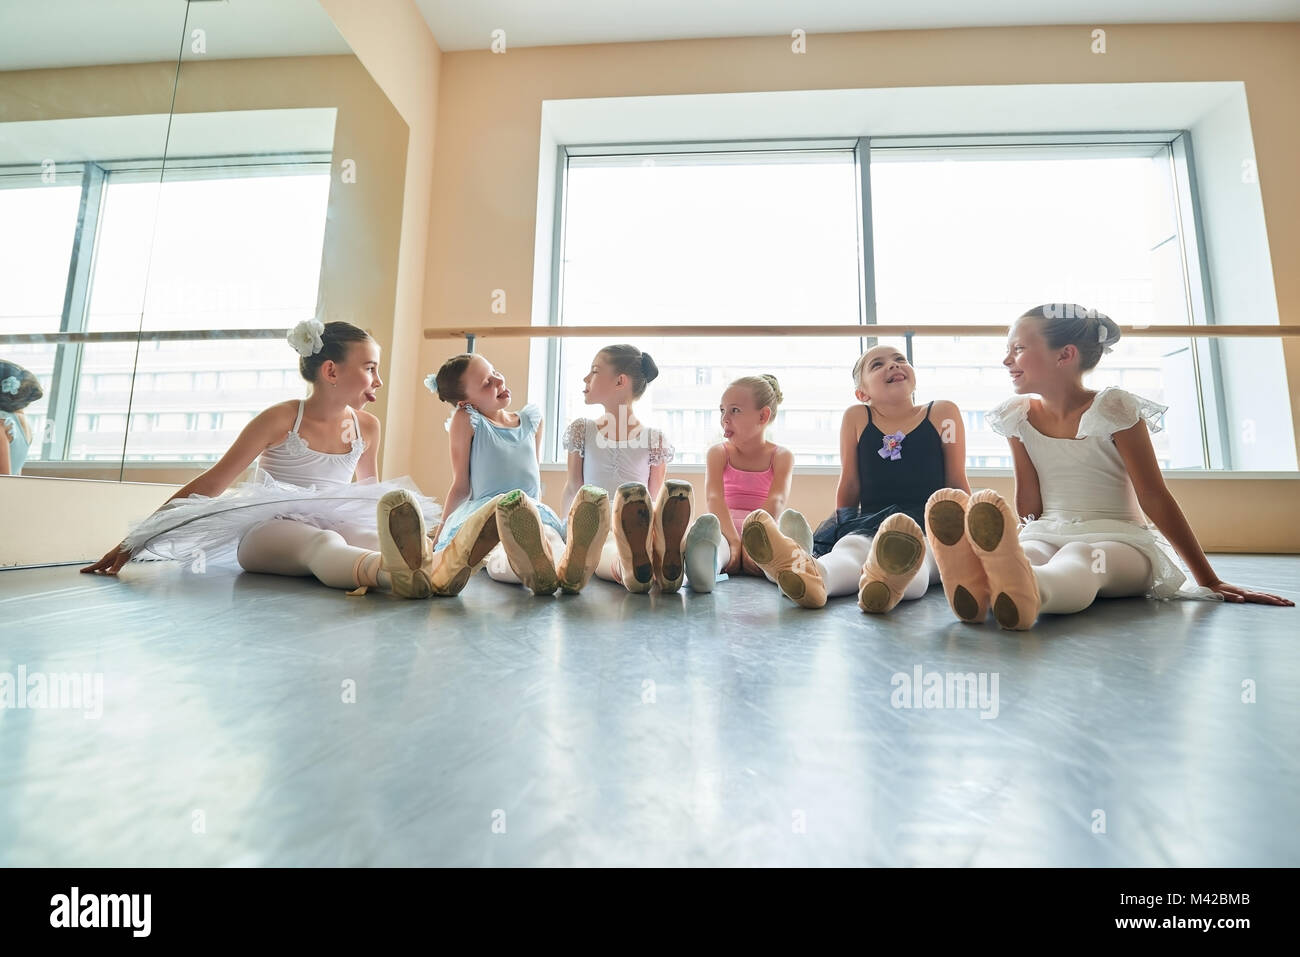 Cute ballerinas having fun in studio. Six young ballerinas showing tongues to each other and laughing. They are good friend. Stock Photo